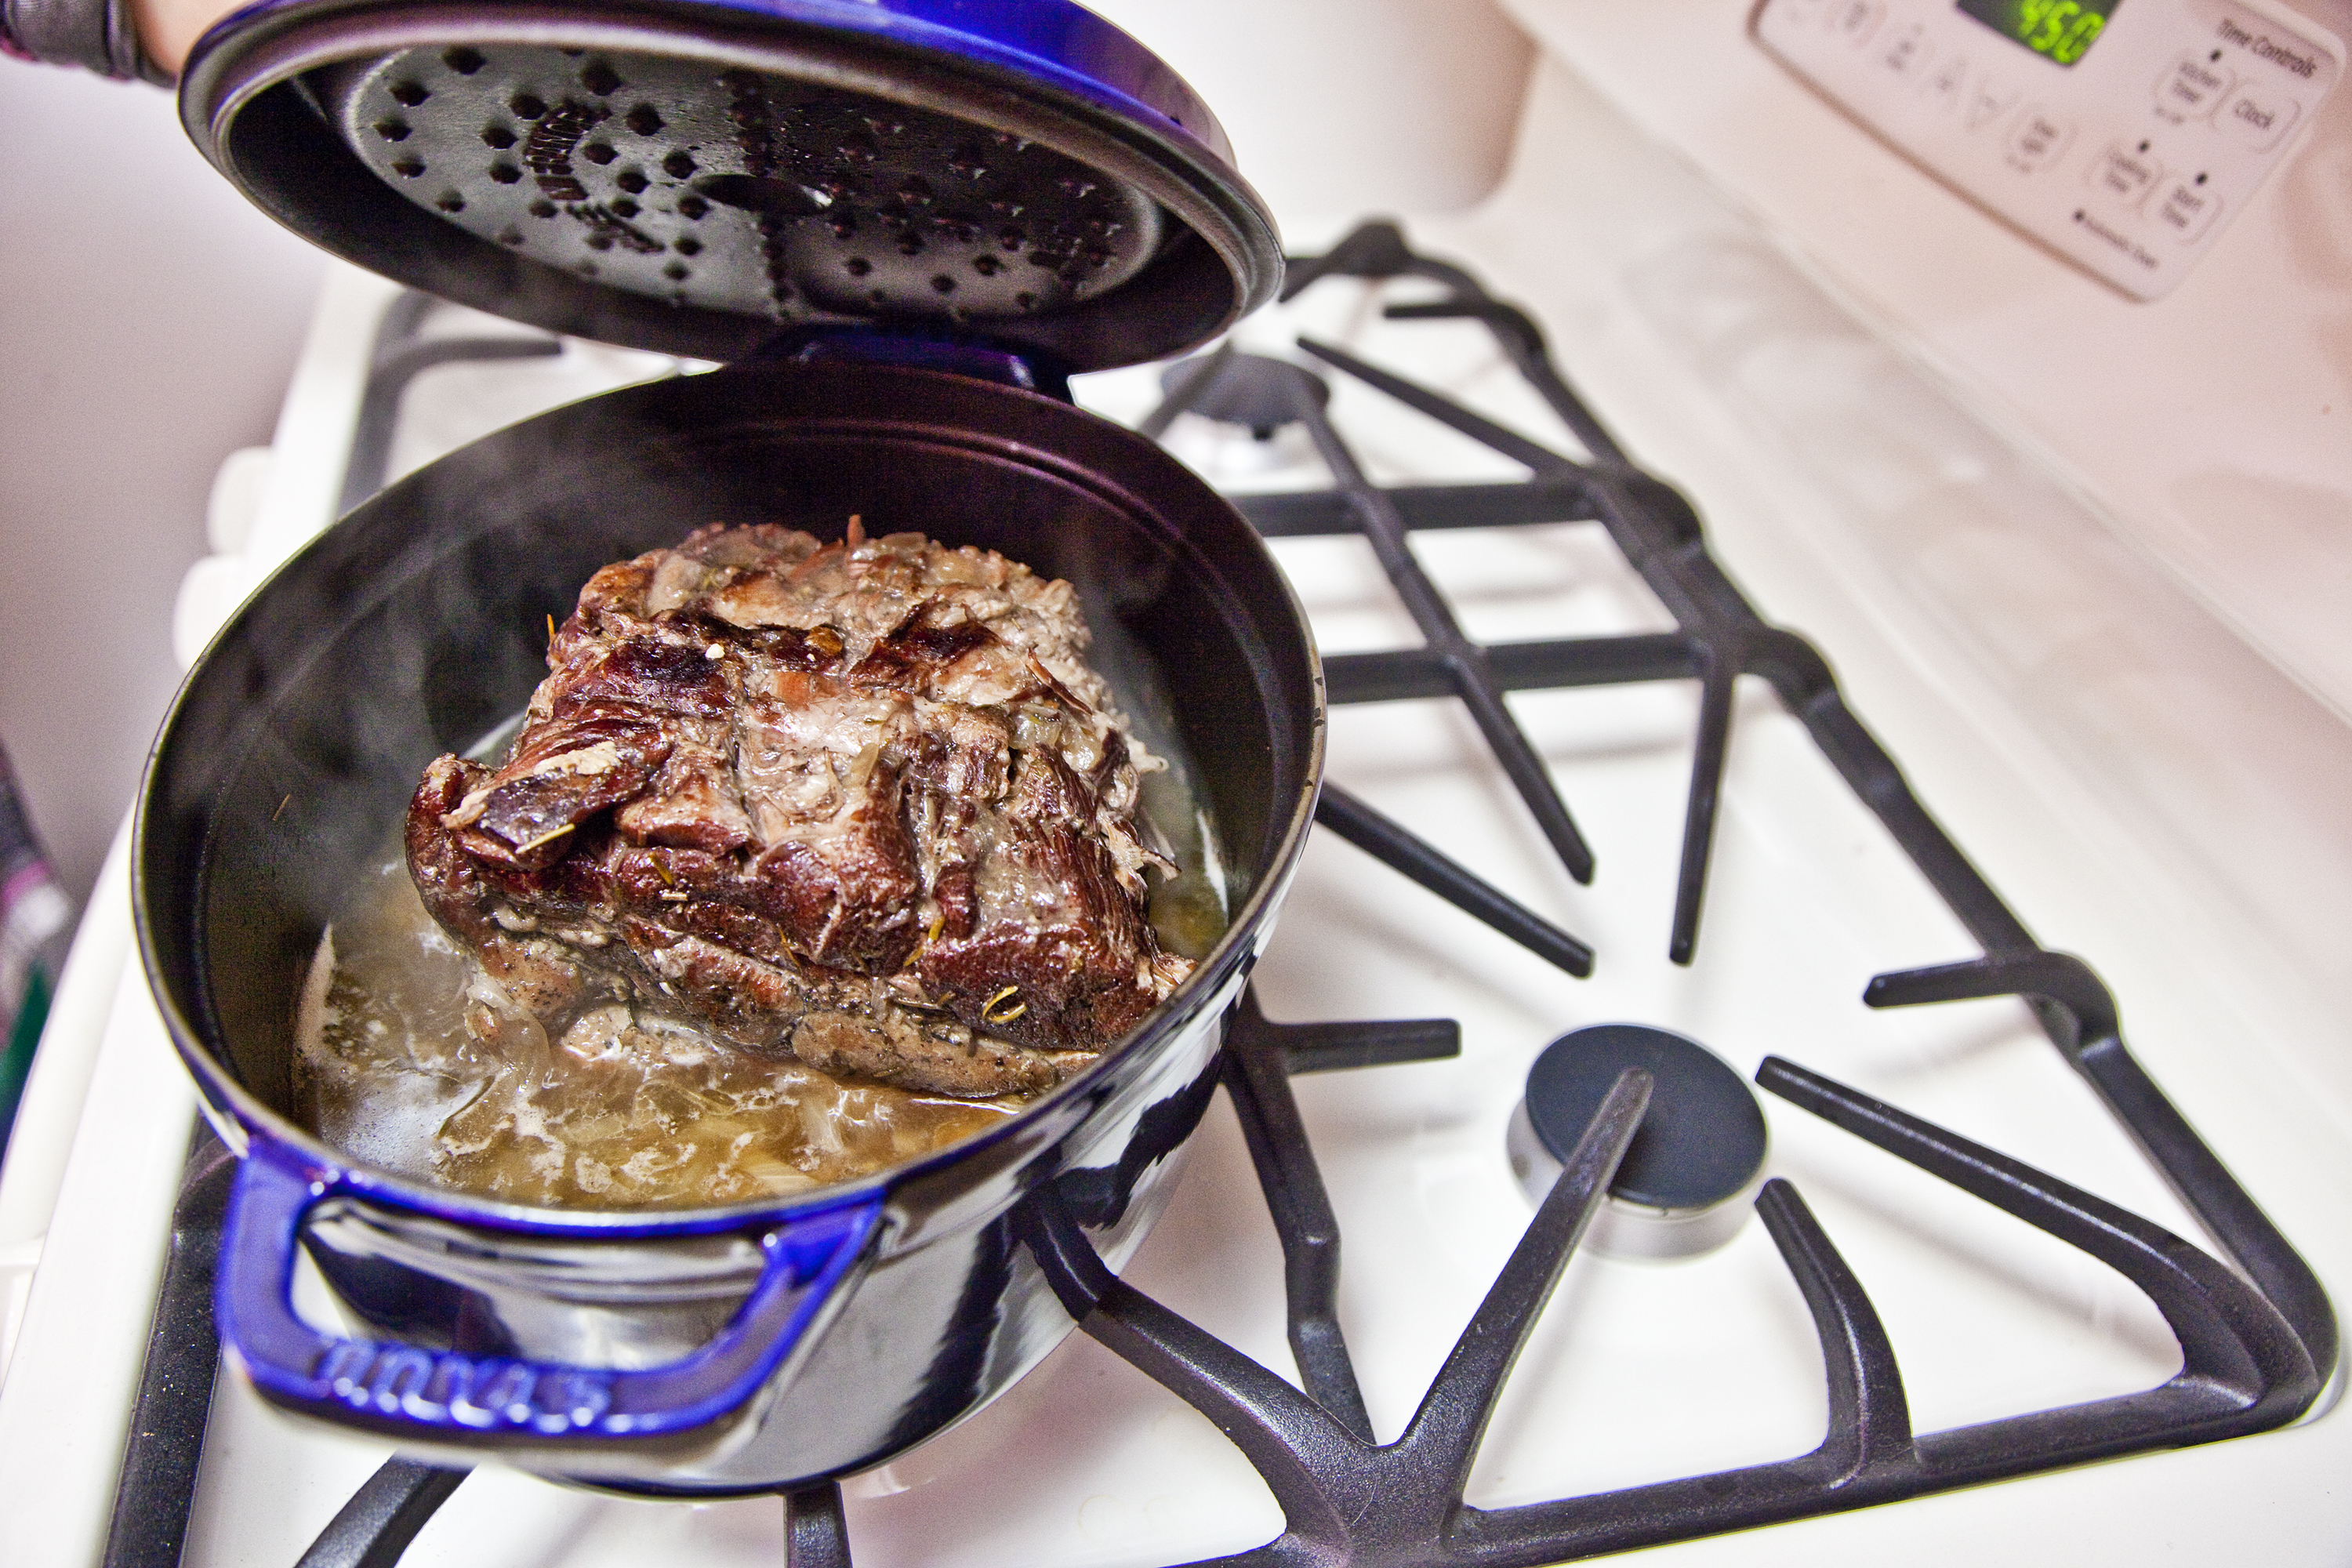 How To Use A Dutch Oven On Stove Top